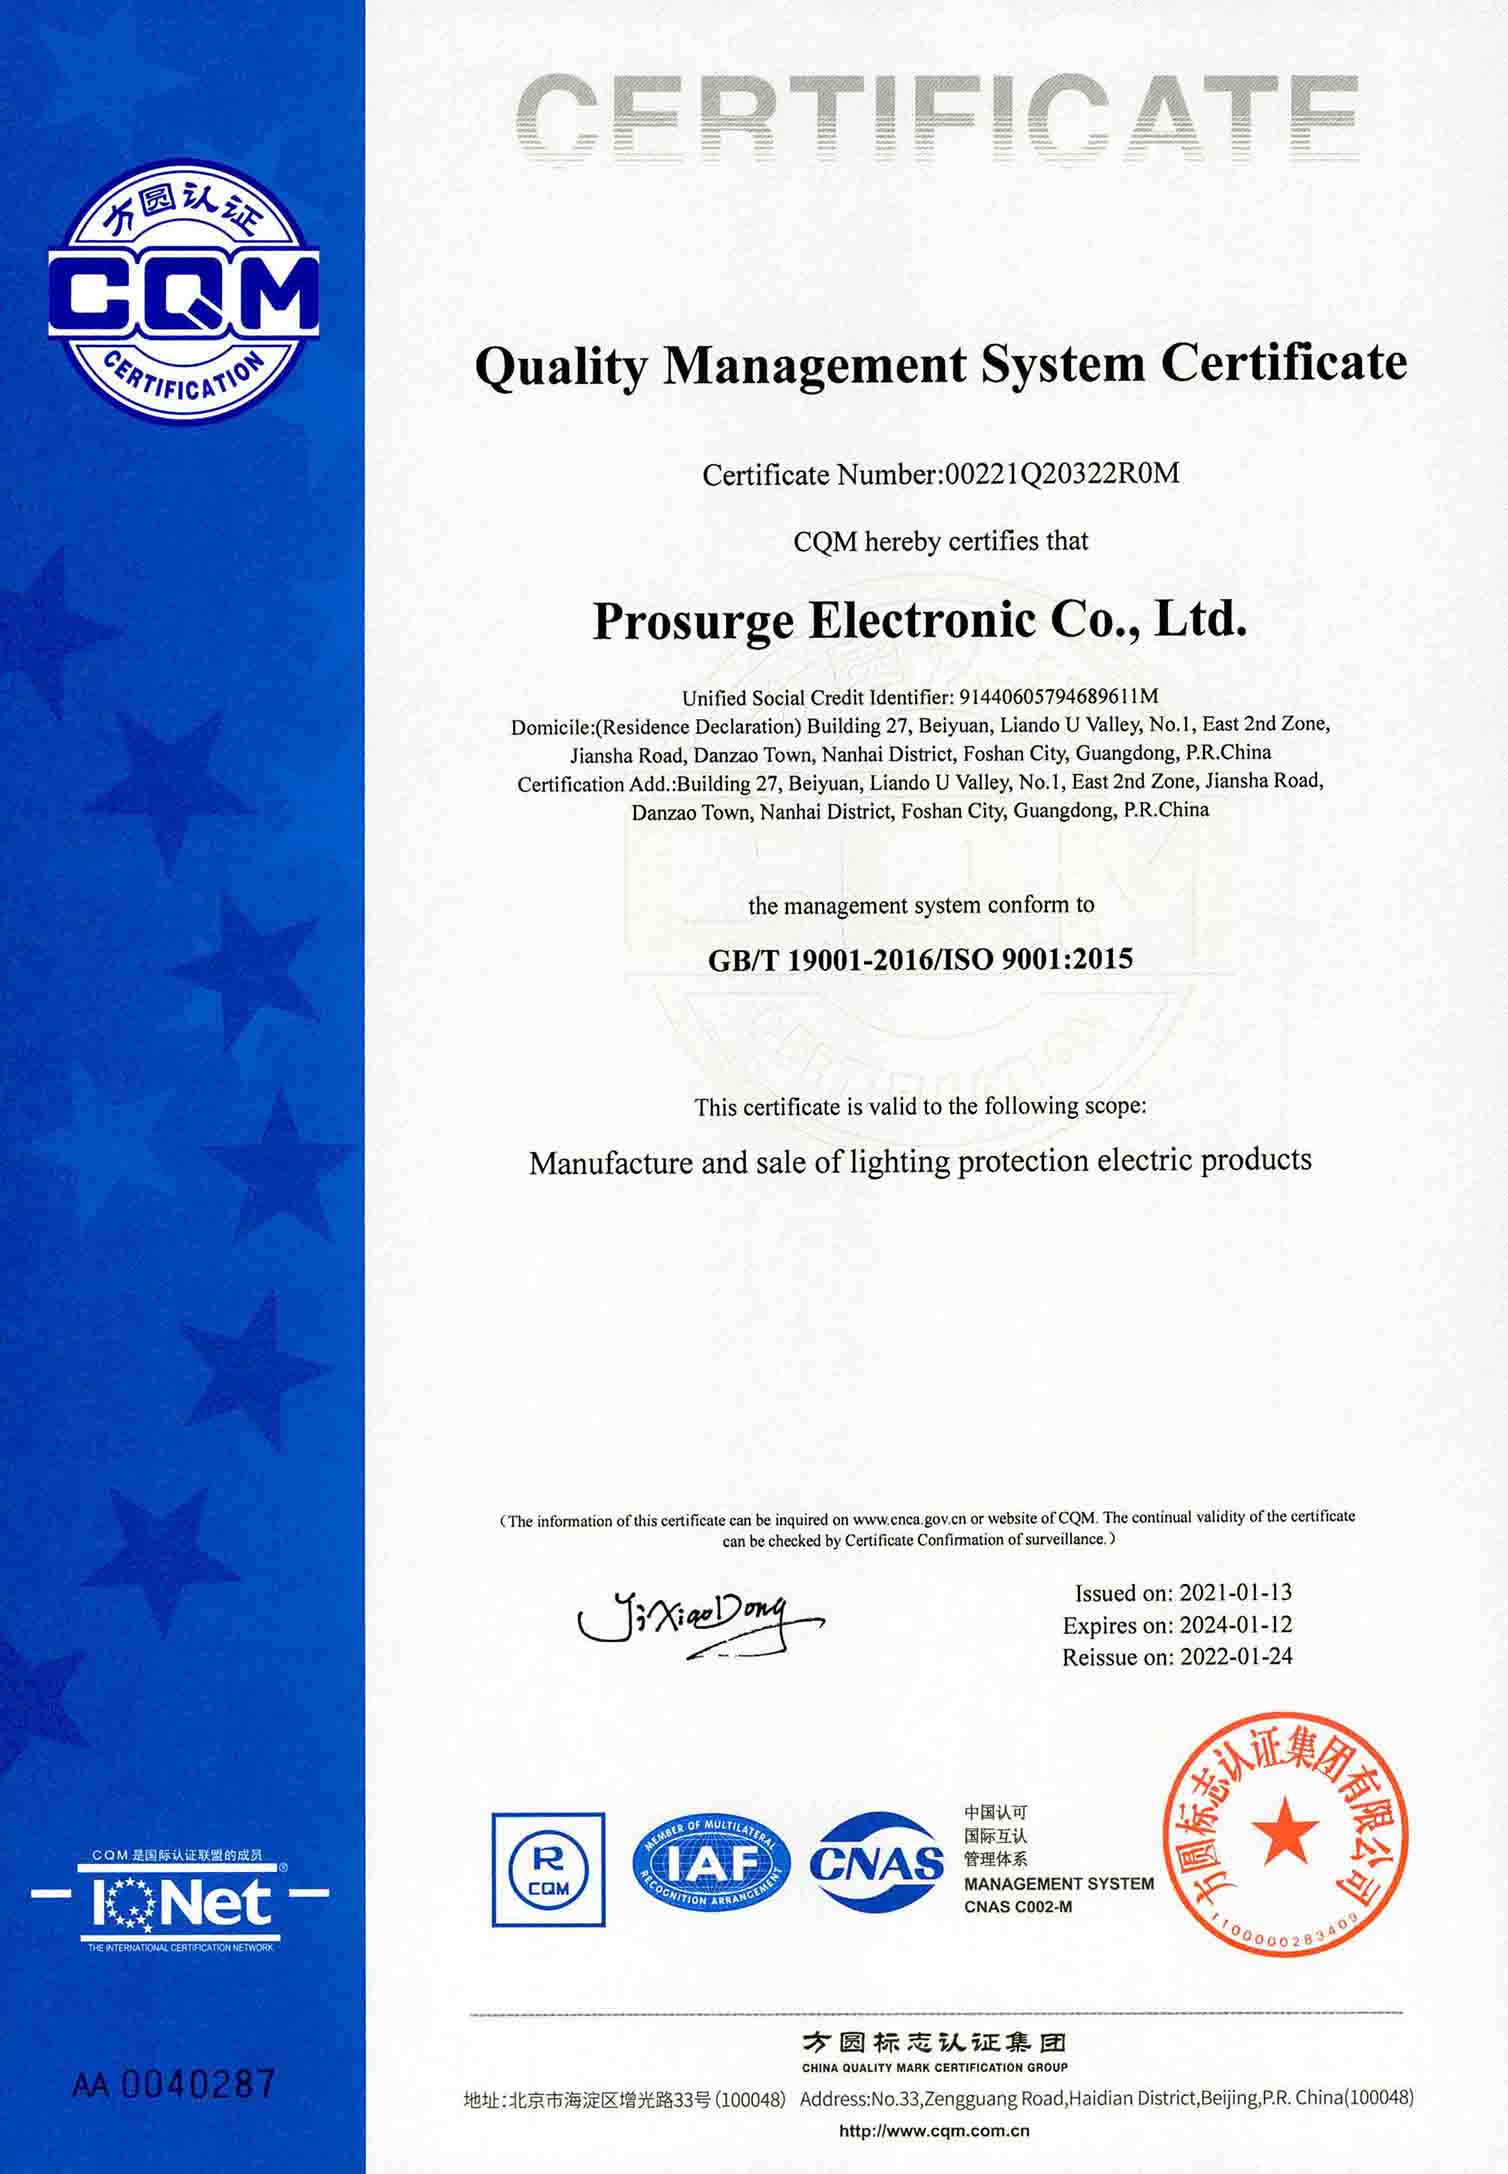 Prosurge is ISO9001 certified company